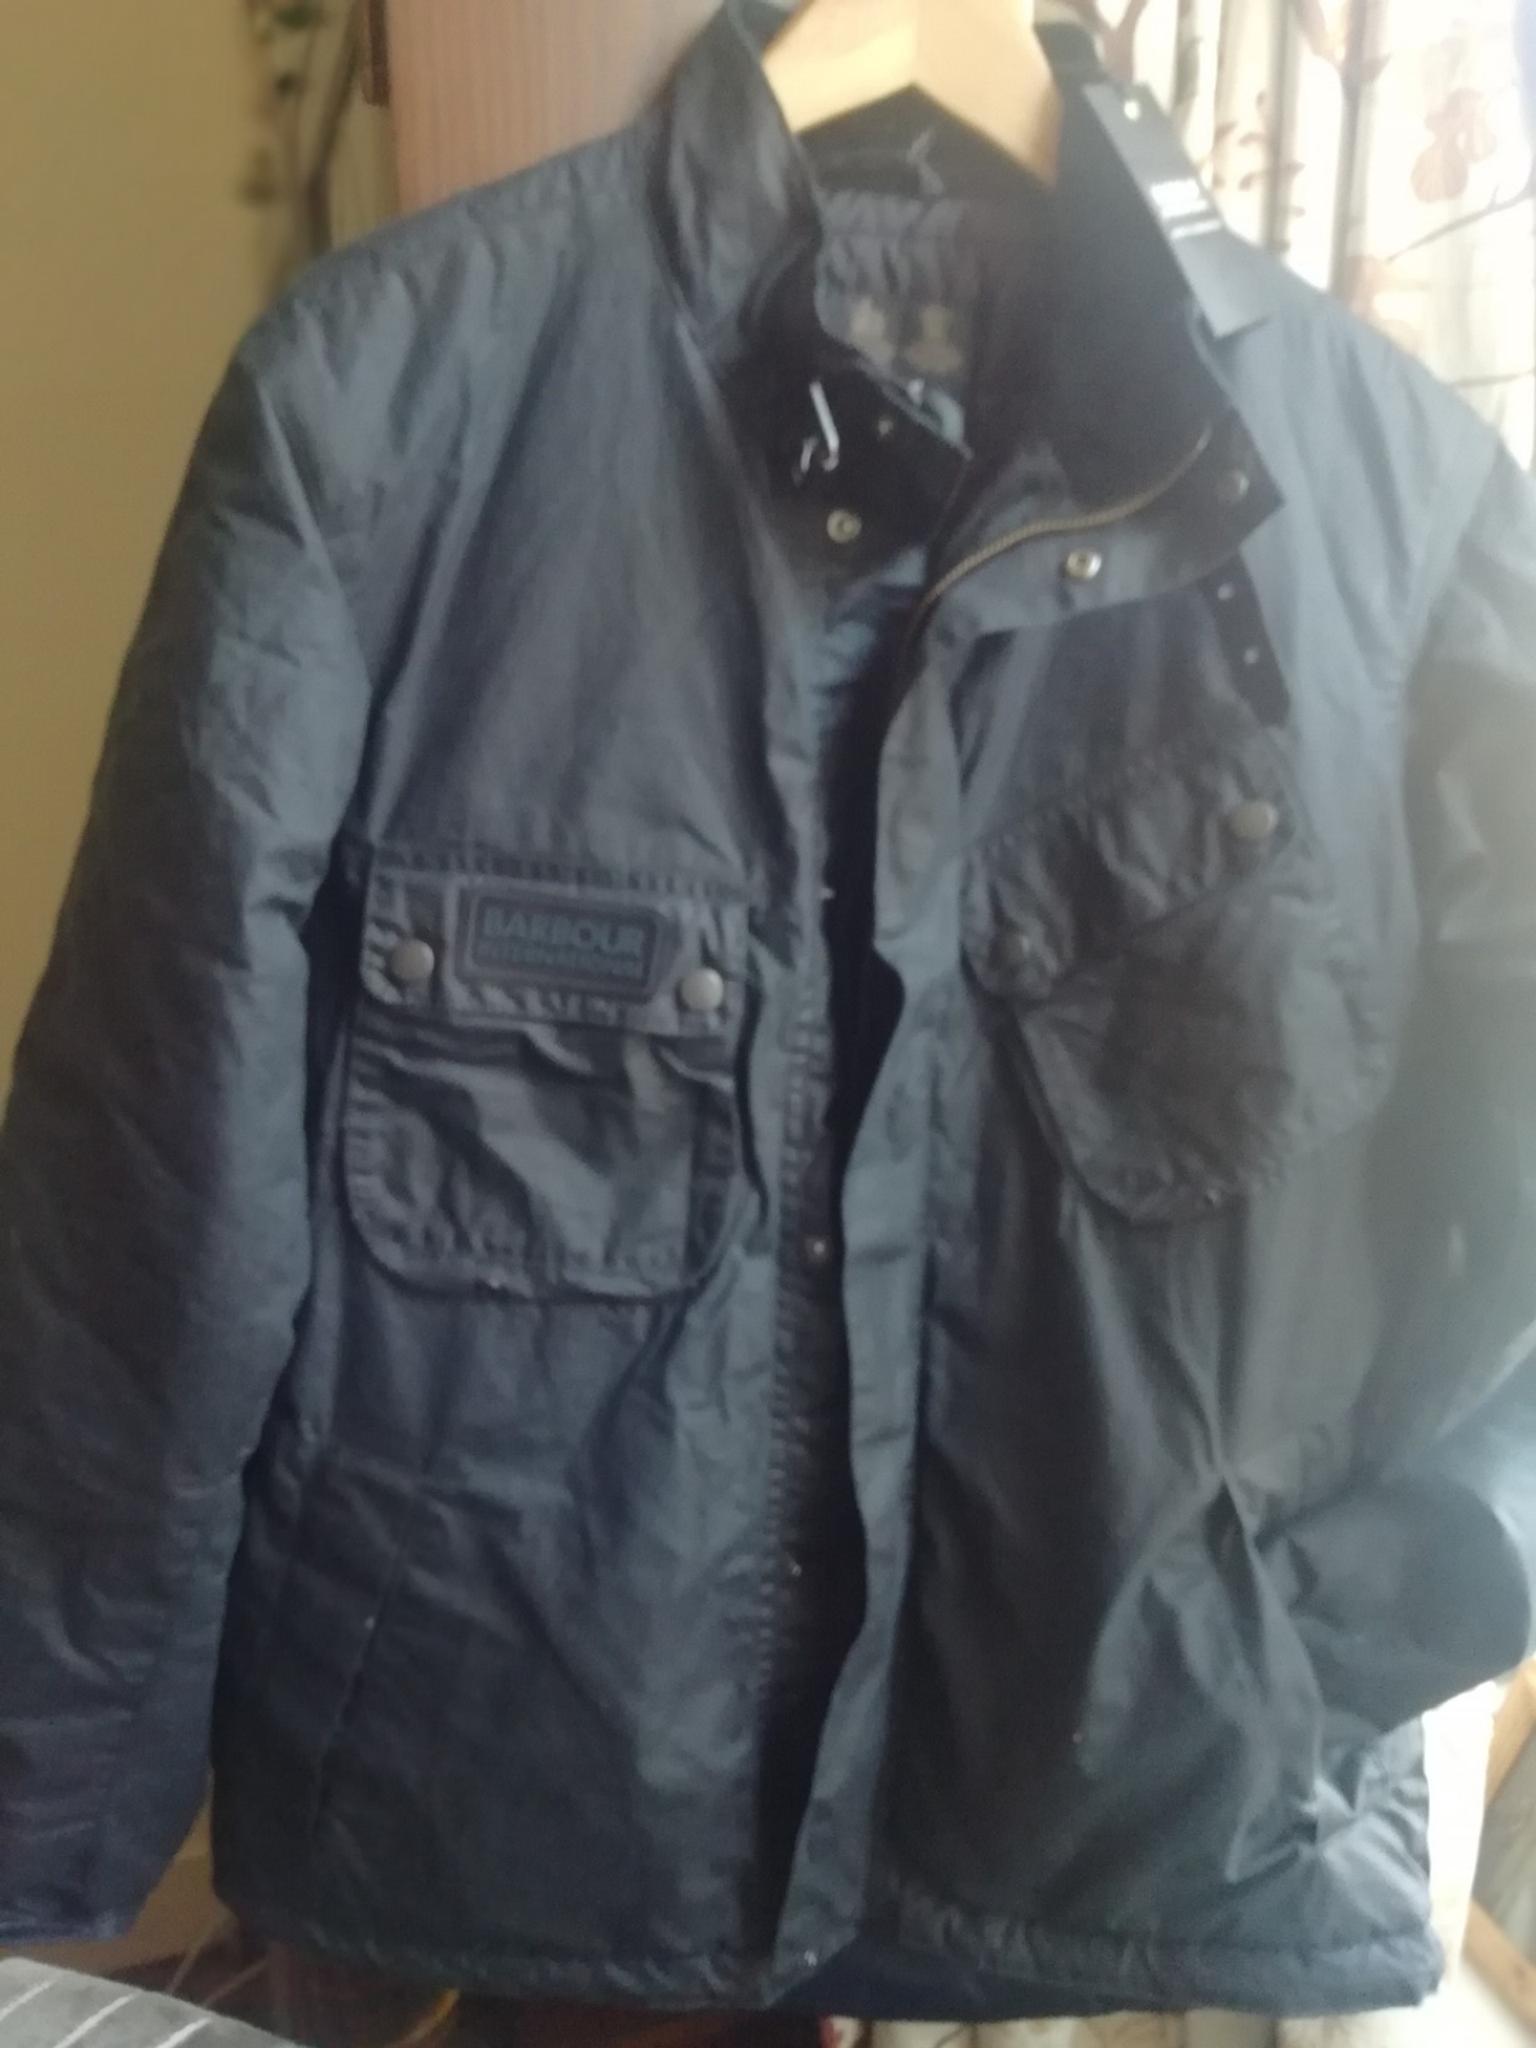 barbour lever